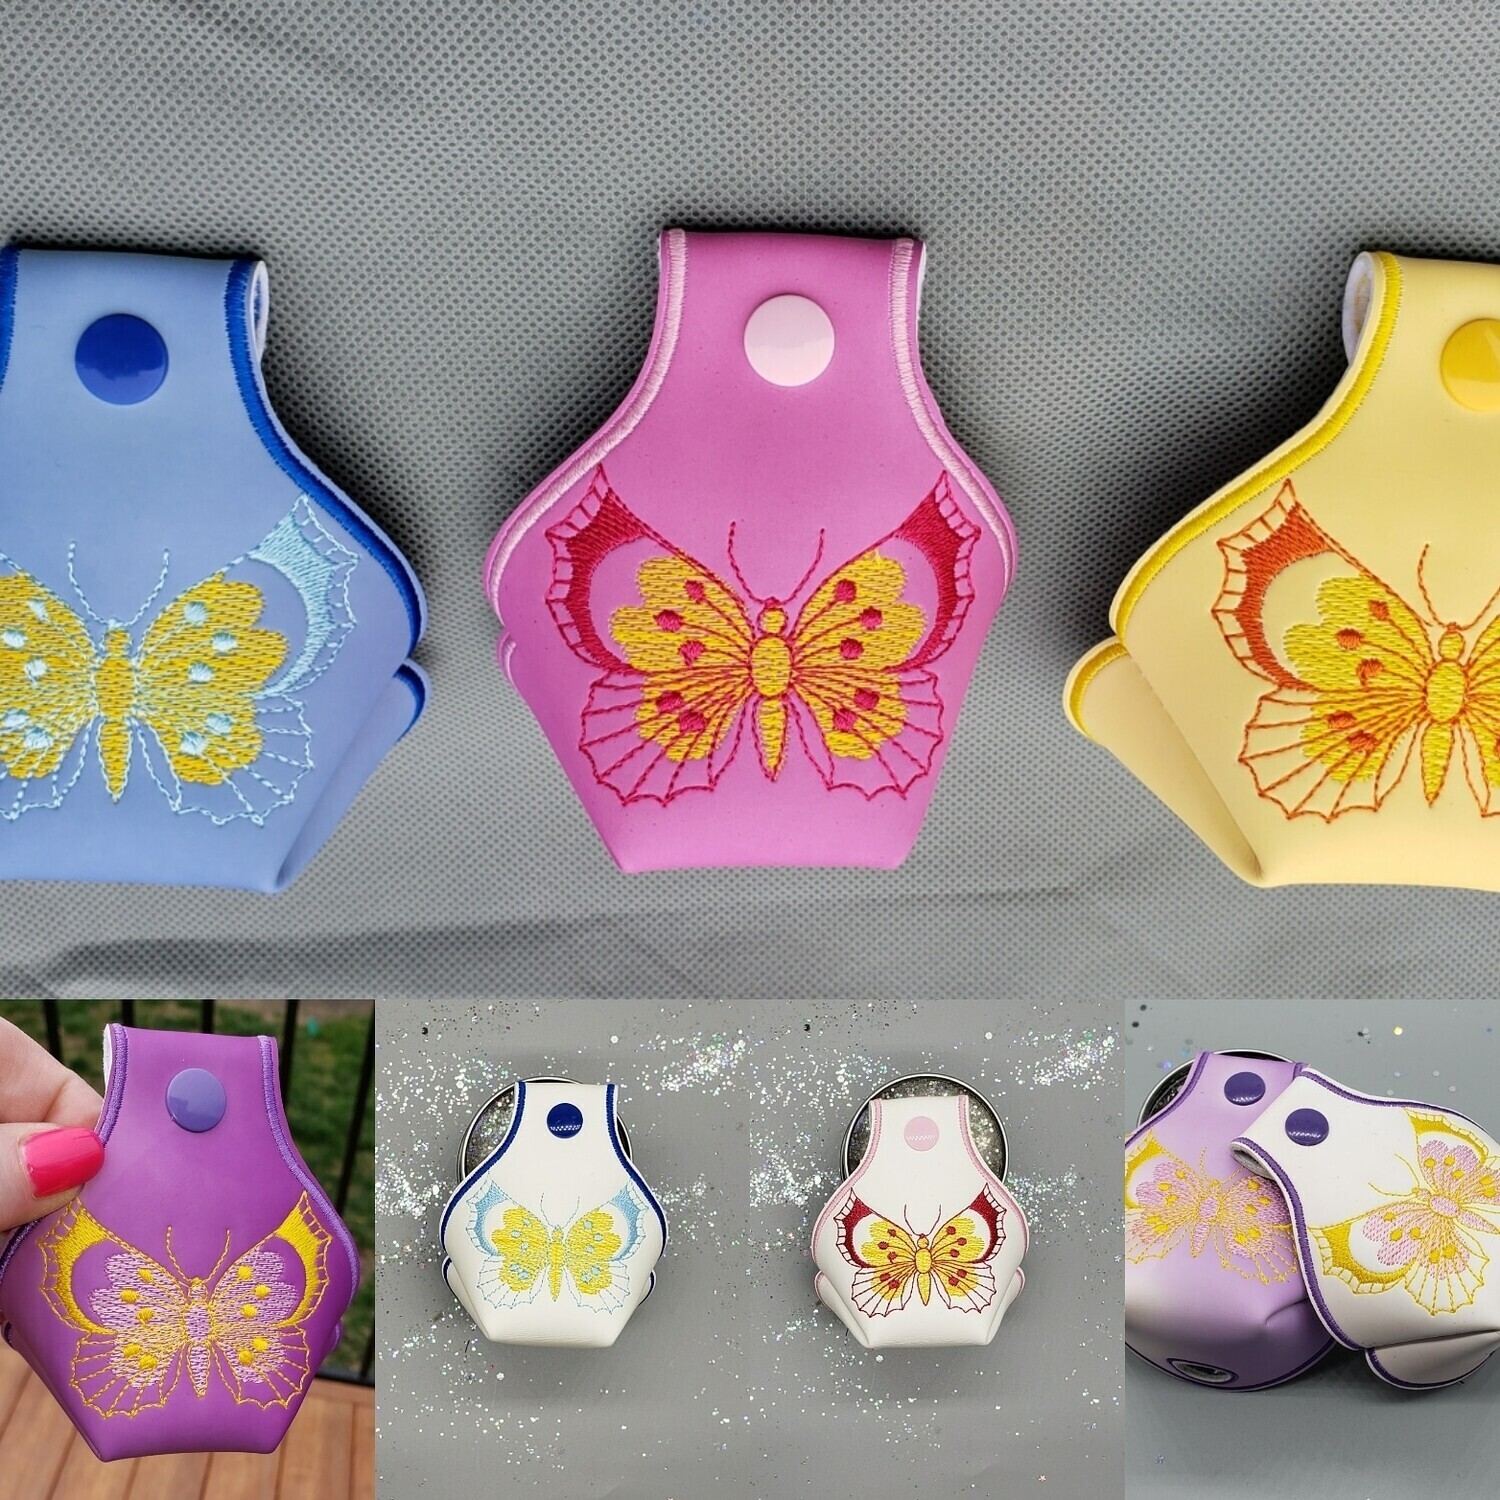 Butterfly Toe guards in color change fabrics as pictured rts